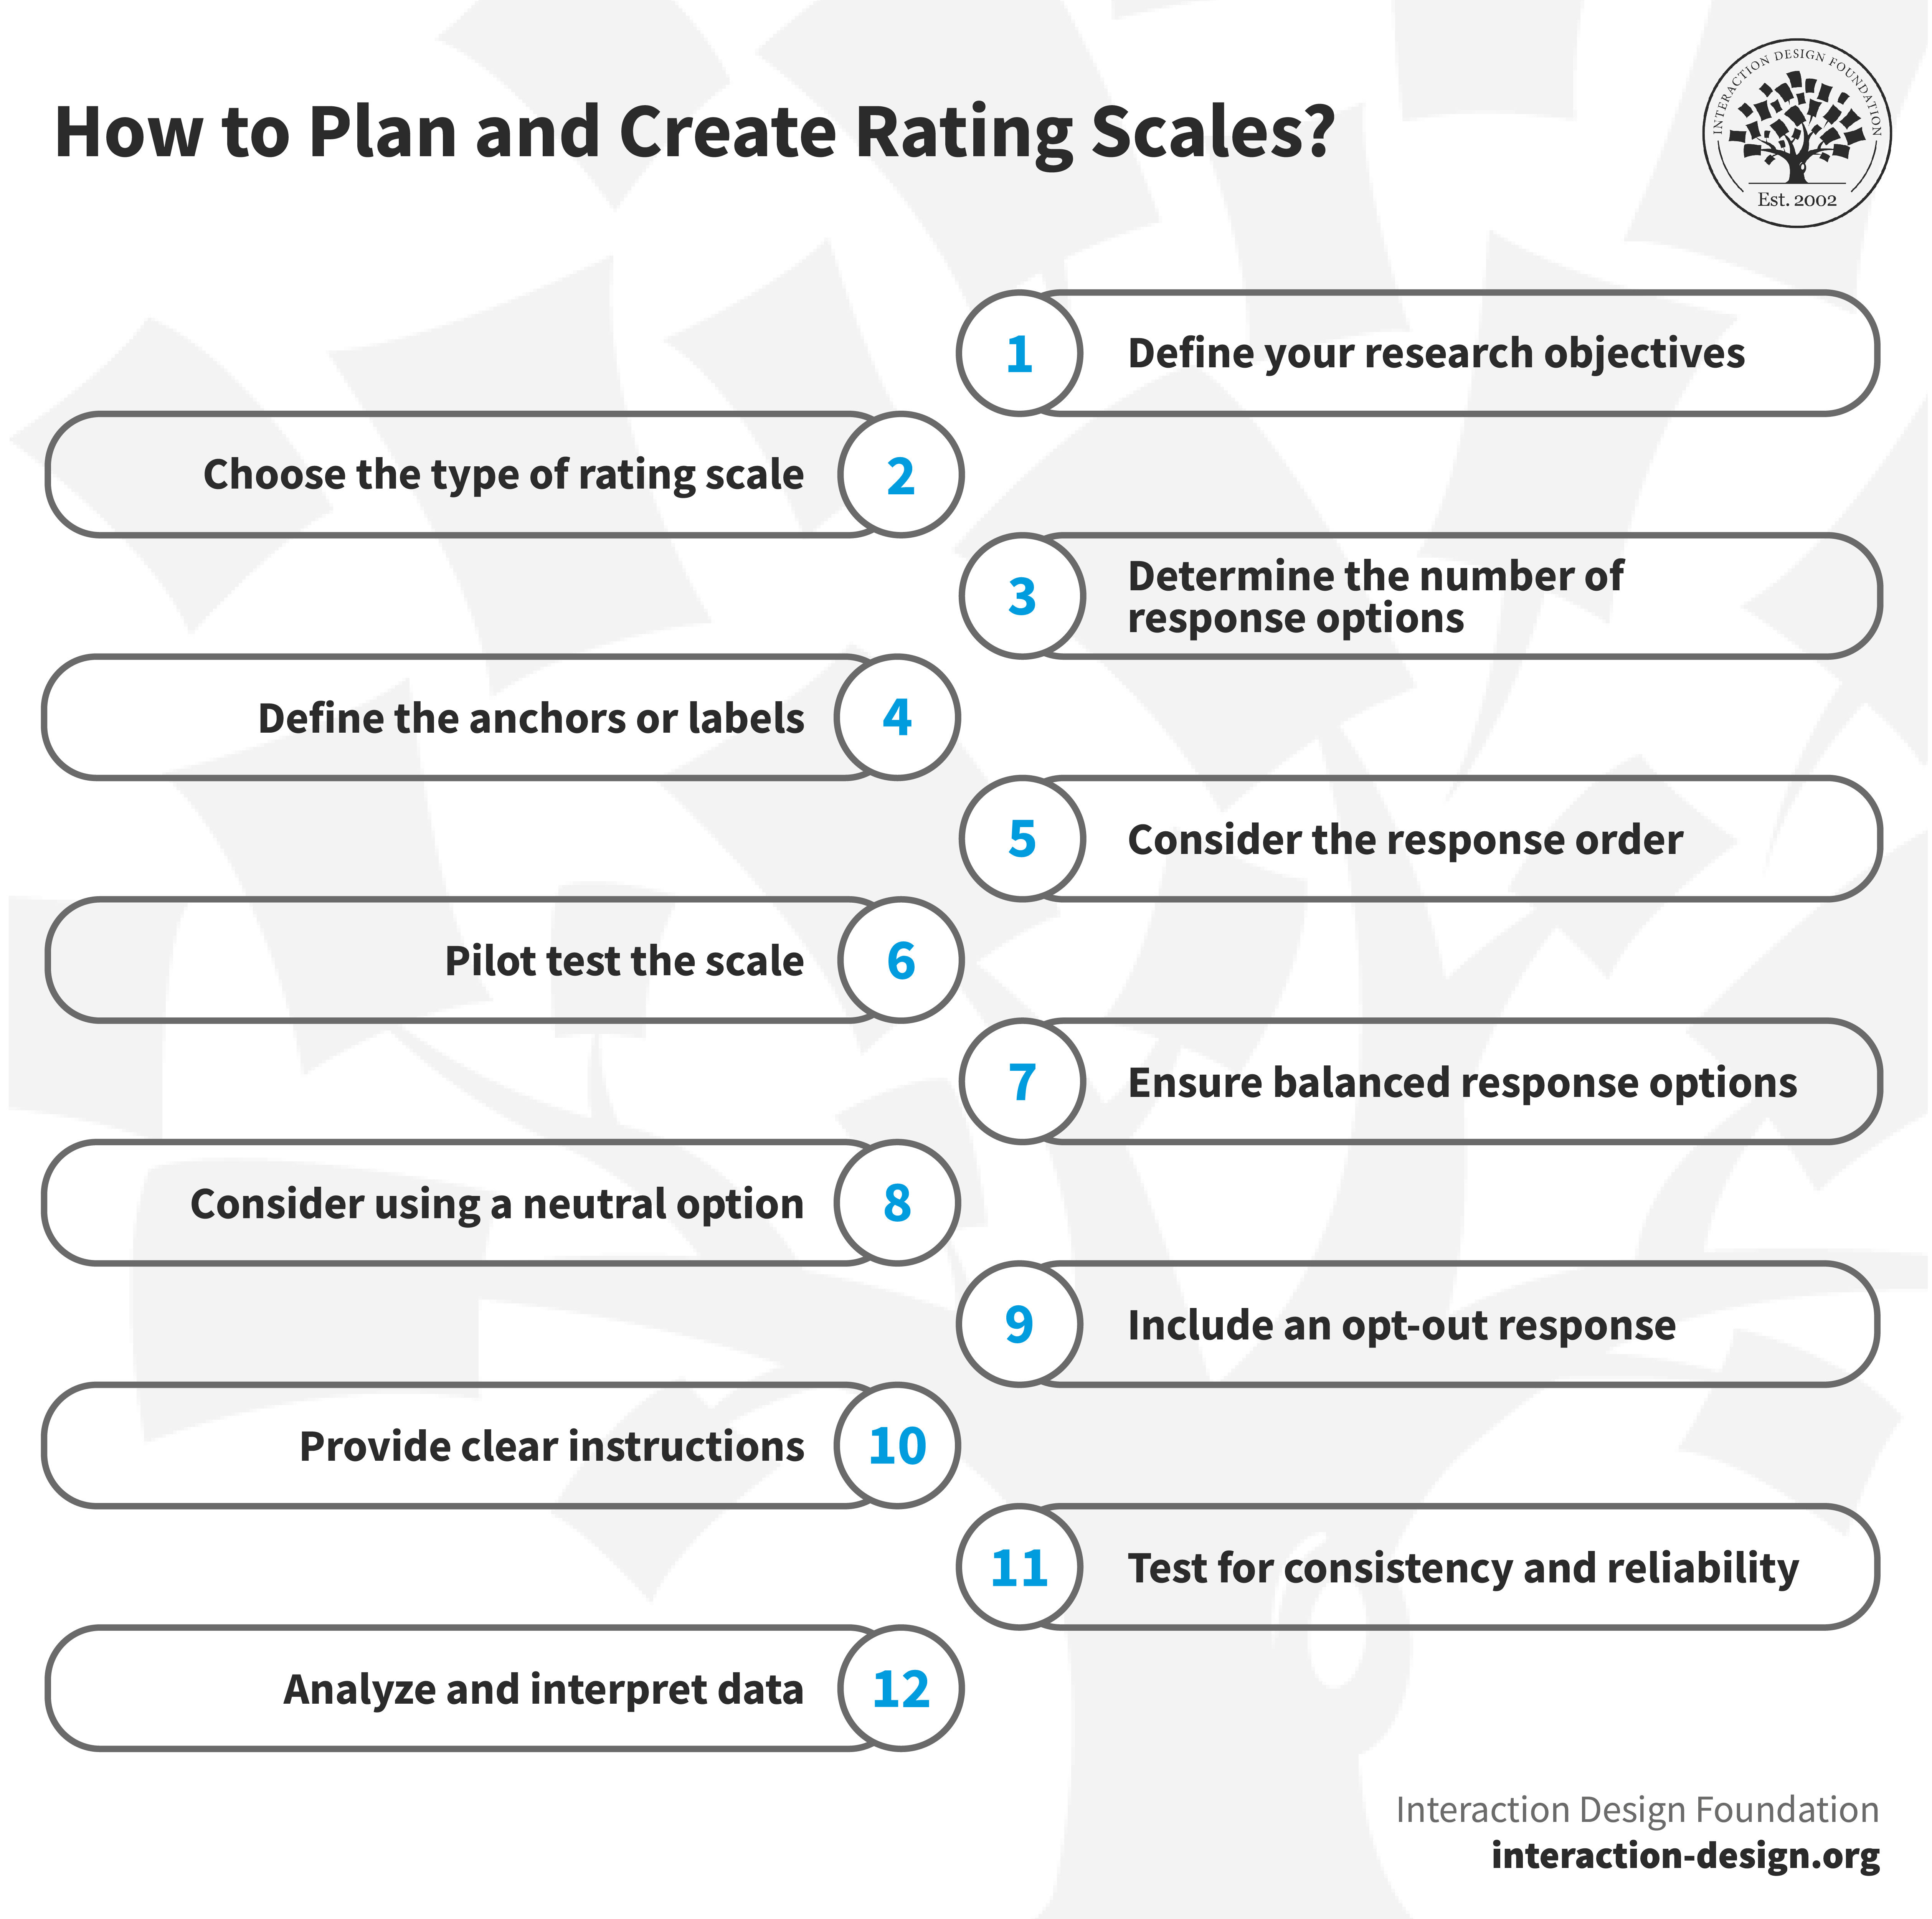 12 steps to plan and create rating scales.